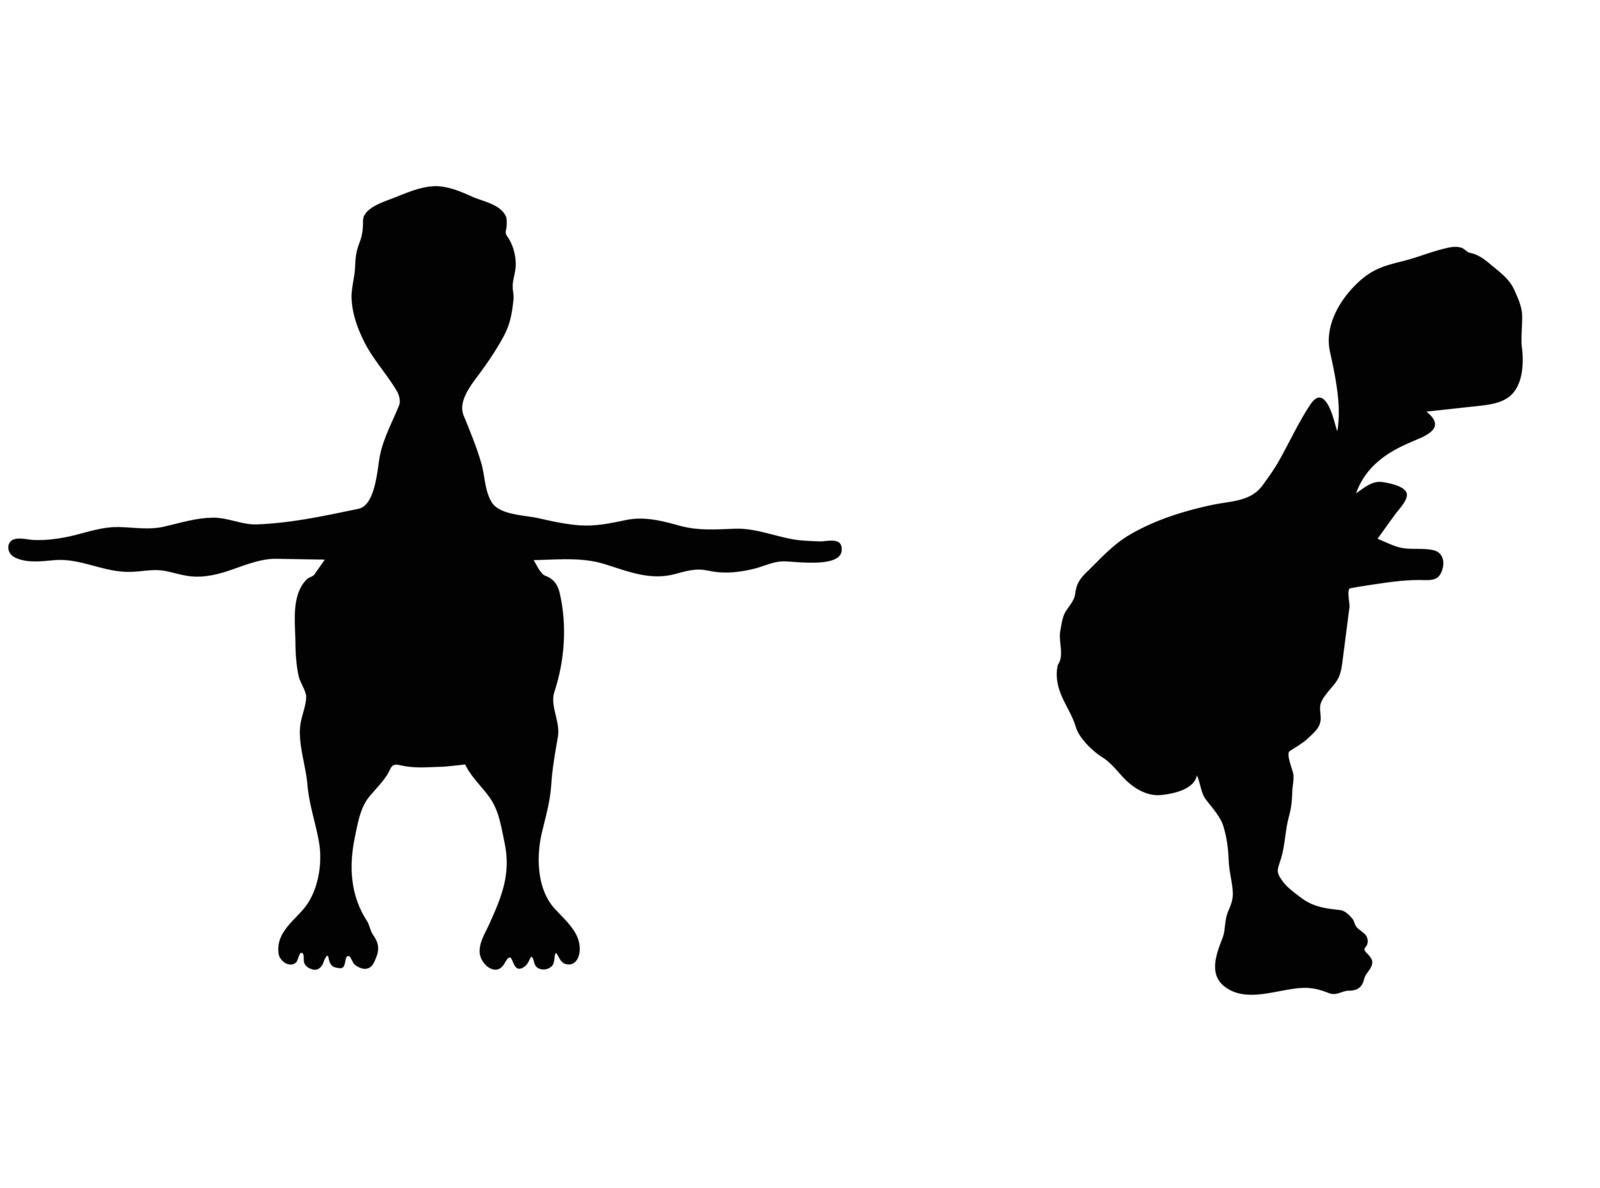 illustration of turtle, tortoise silhouette by Istanbul2009